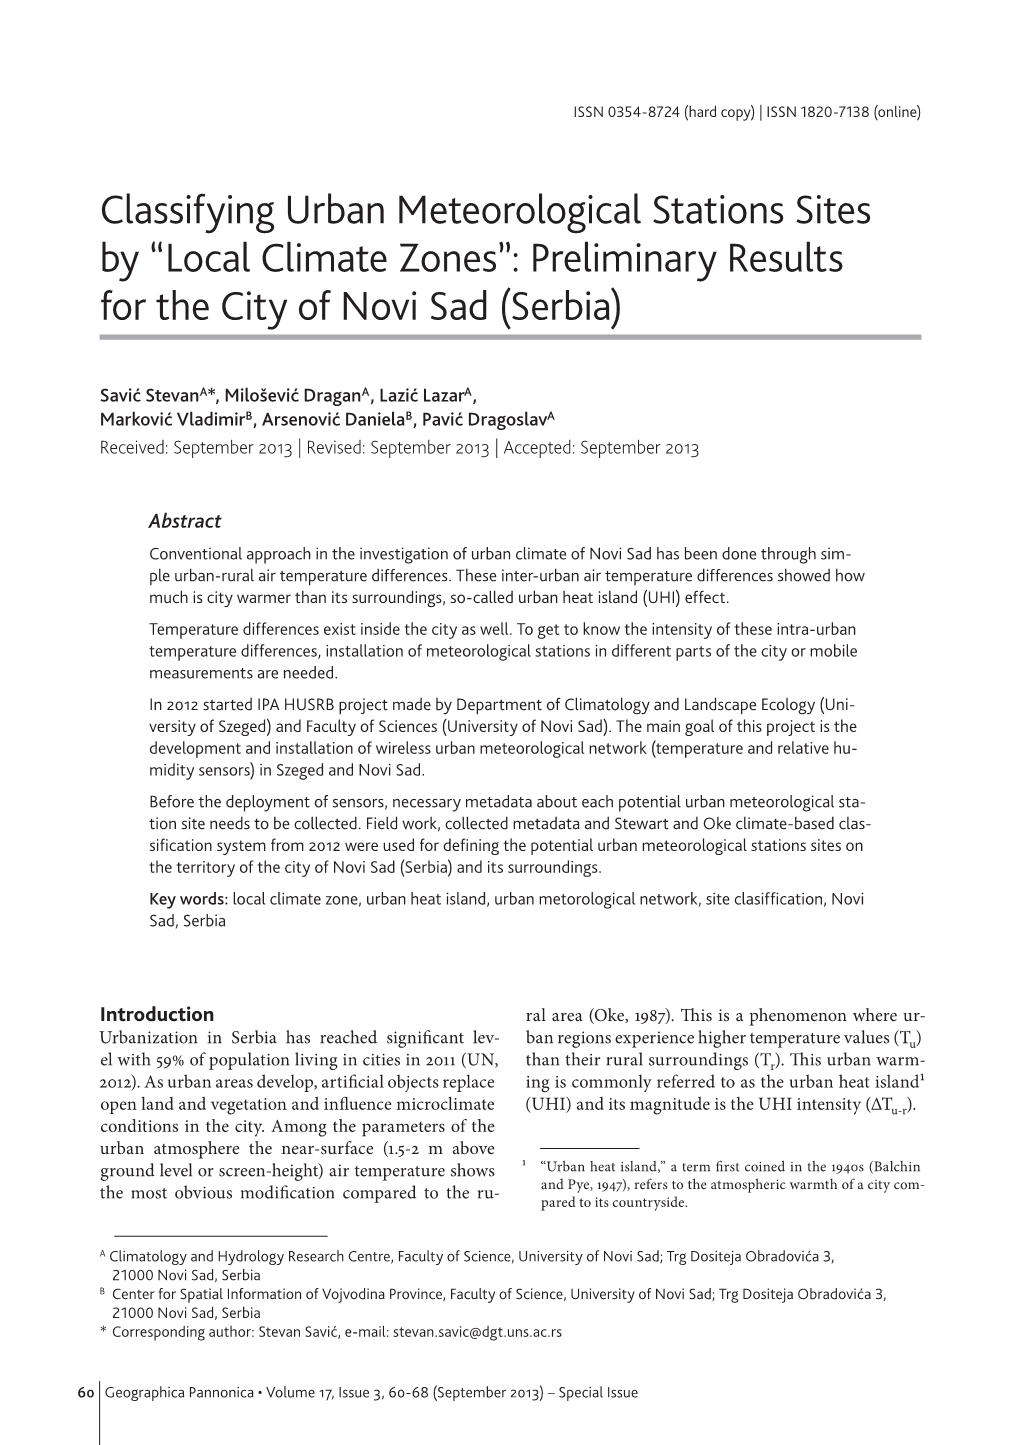 Classifying Urban Meteorological Stations Sites by “Local Climate Zones”: Preliminary Results for the City of Novi Sad (Serbia)